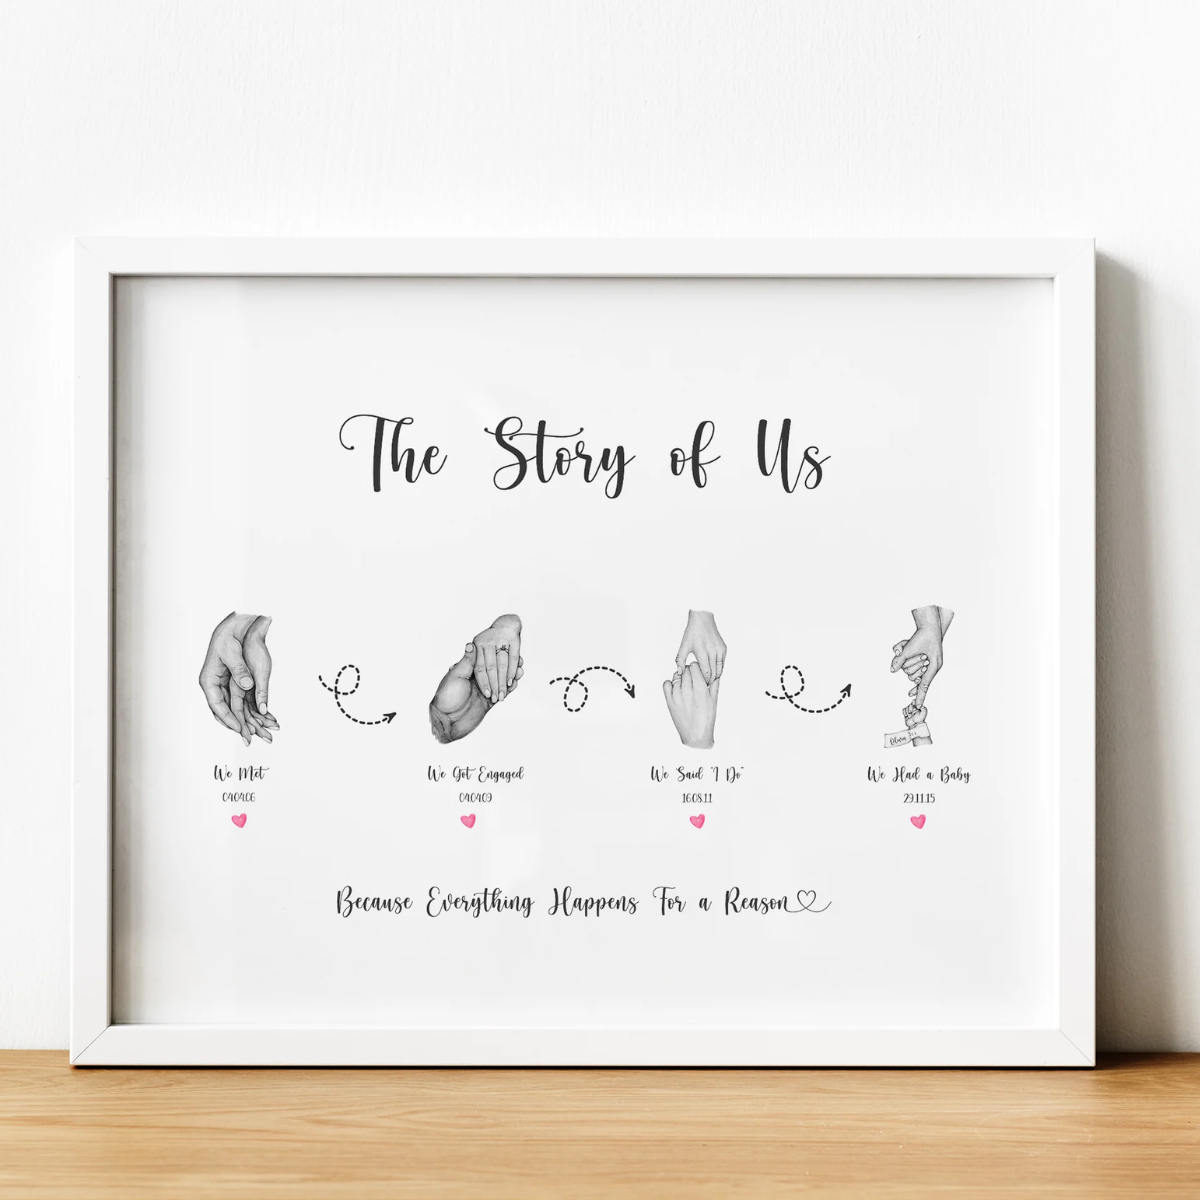 21. Capture Your Love Story with a Customized Relationship Timeline Print